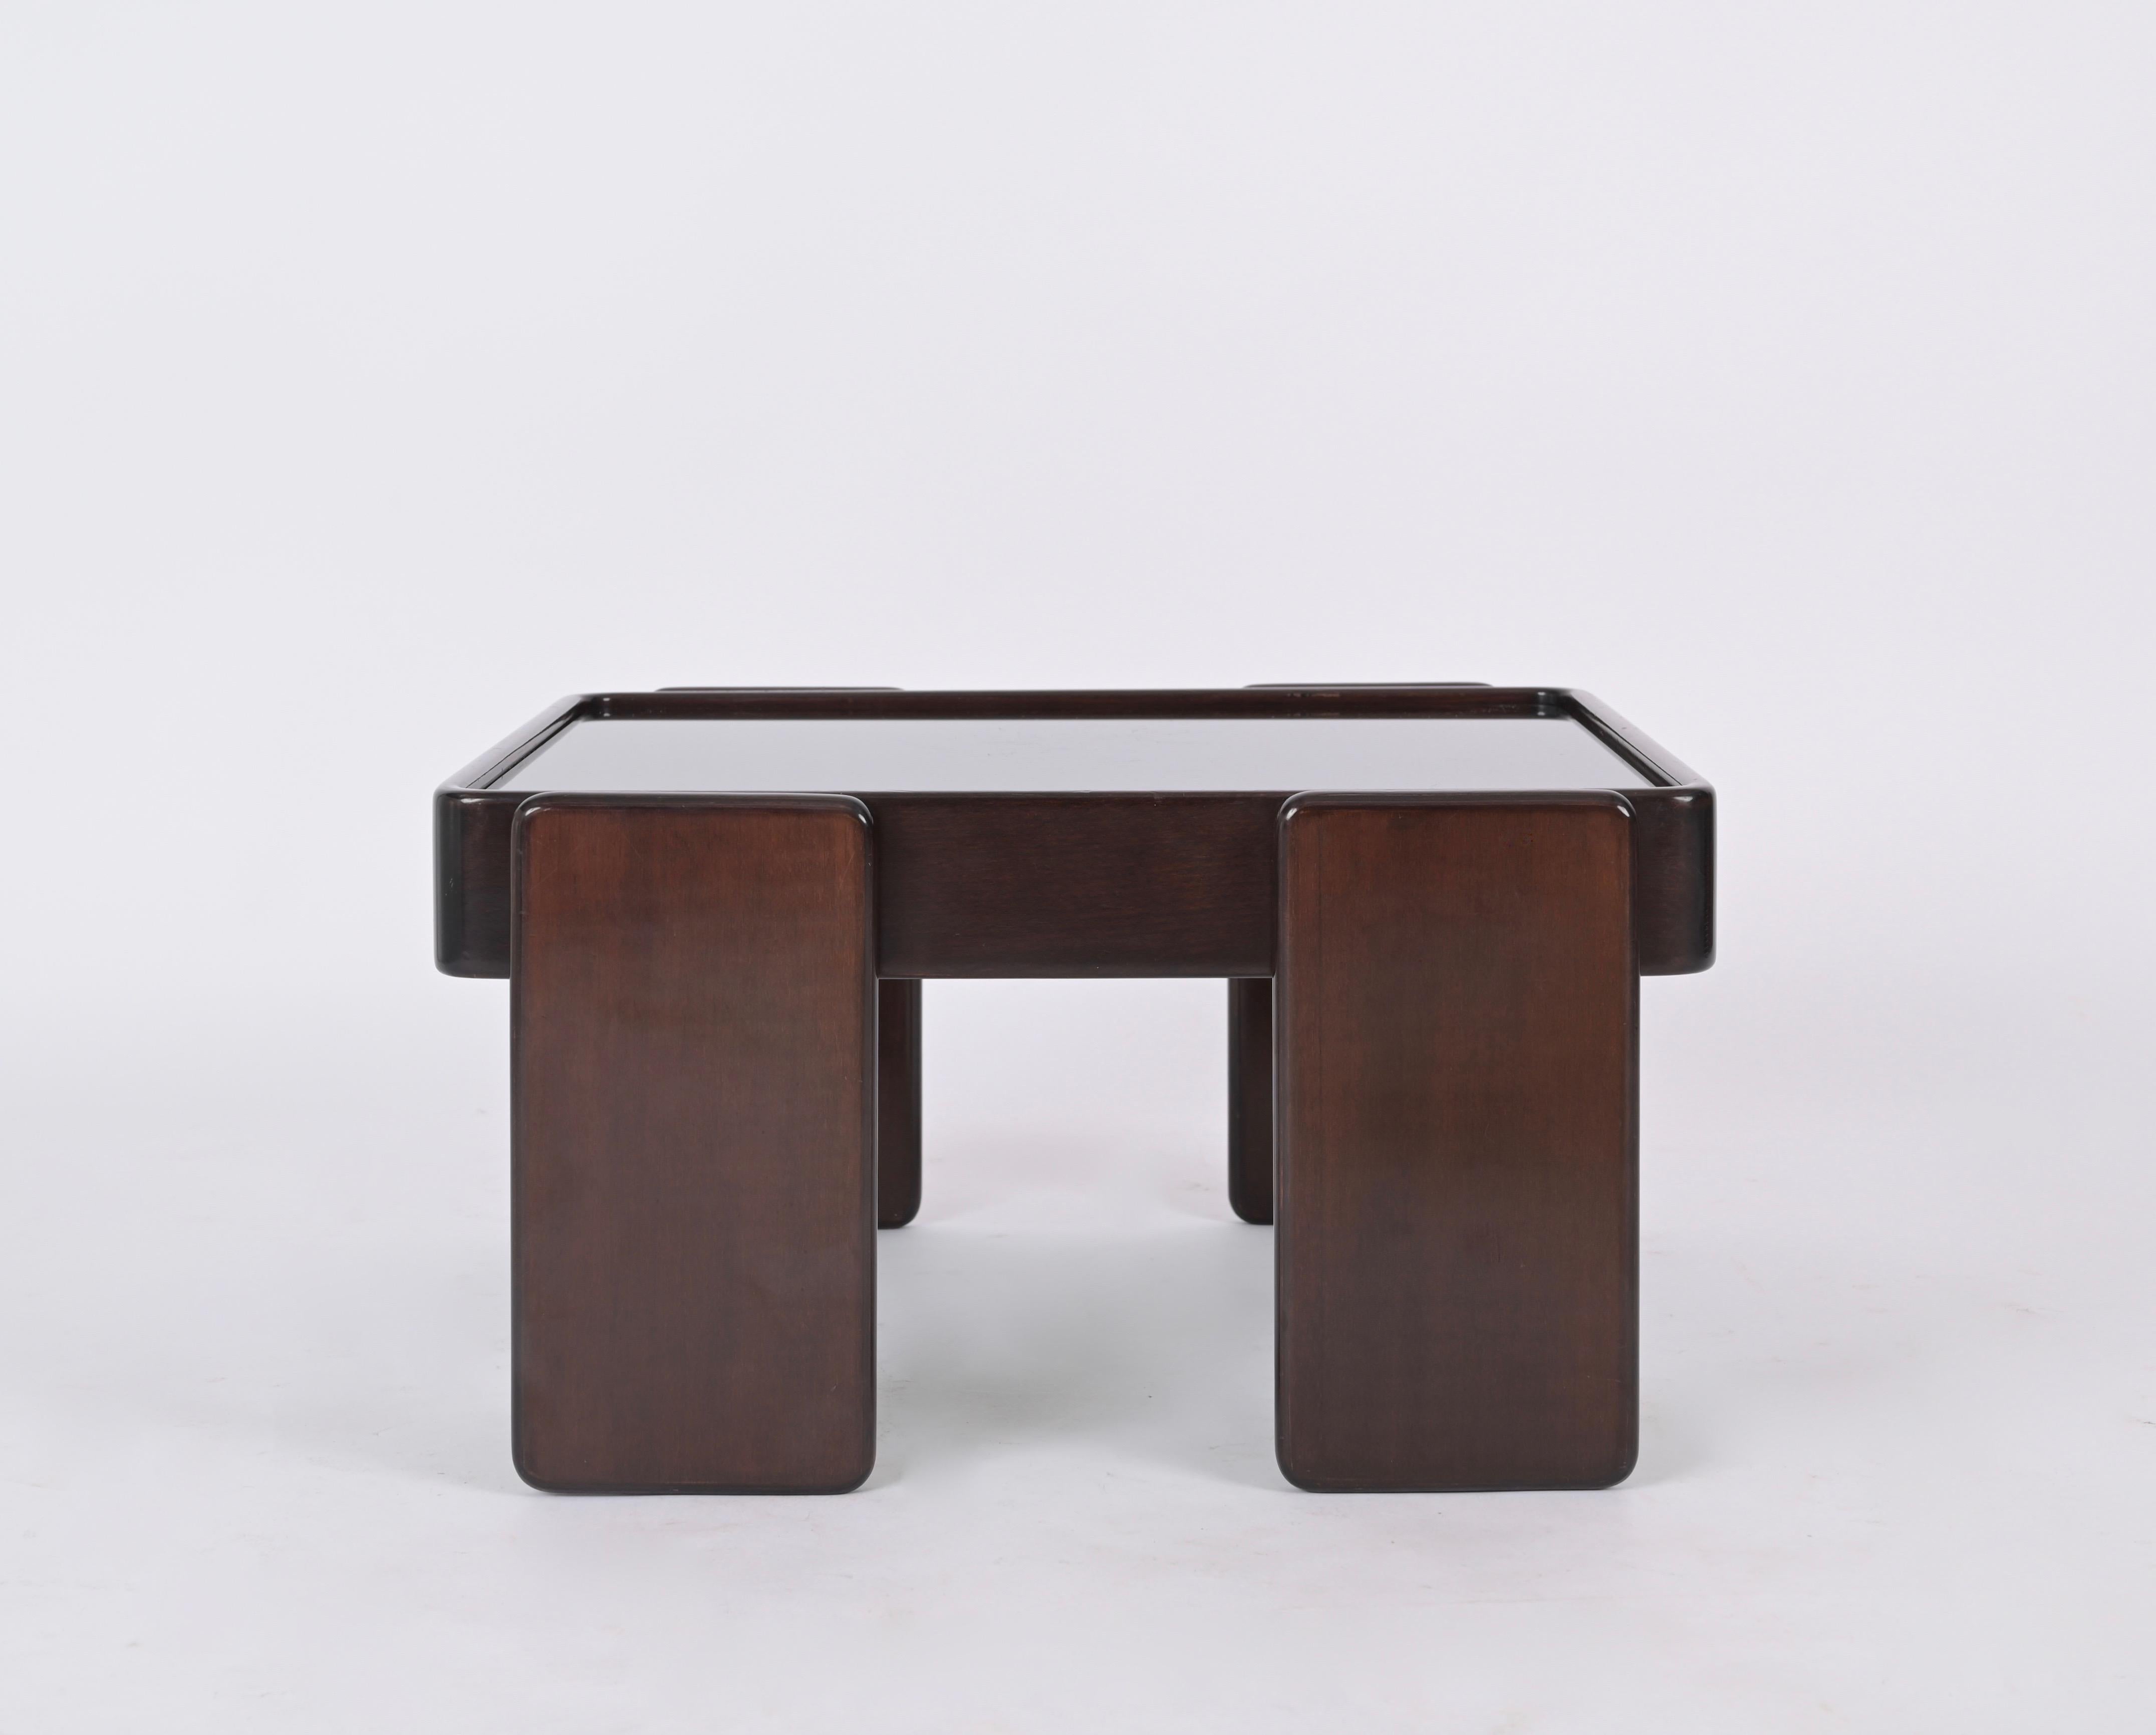 Hand-Crafted Square Coffee Table with Smoked Glass by Frattini for Cassina, Italy, 1970s For Sale